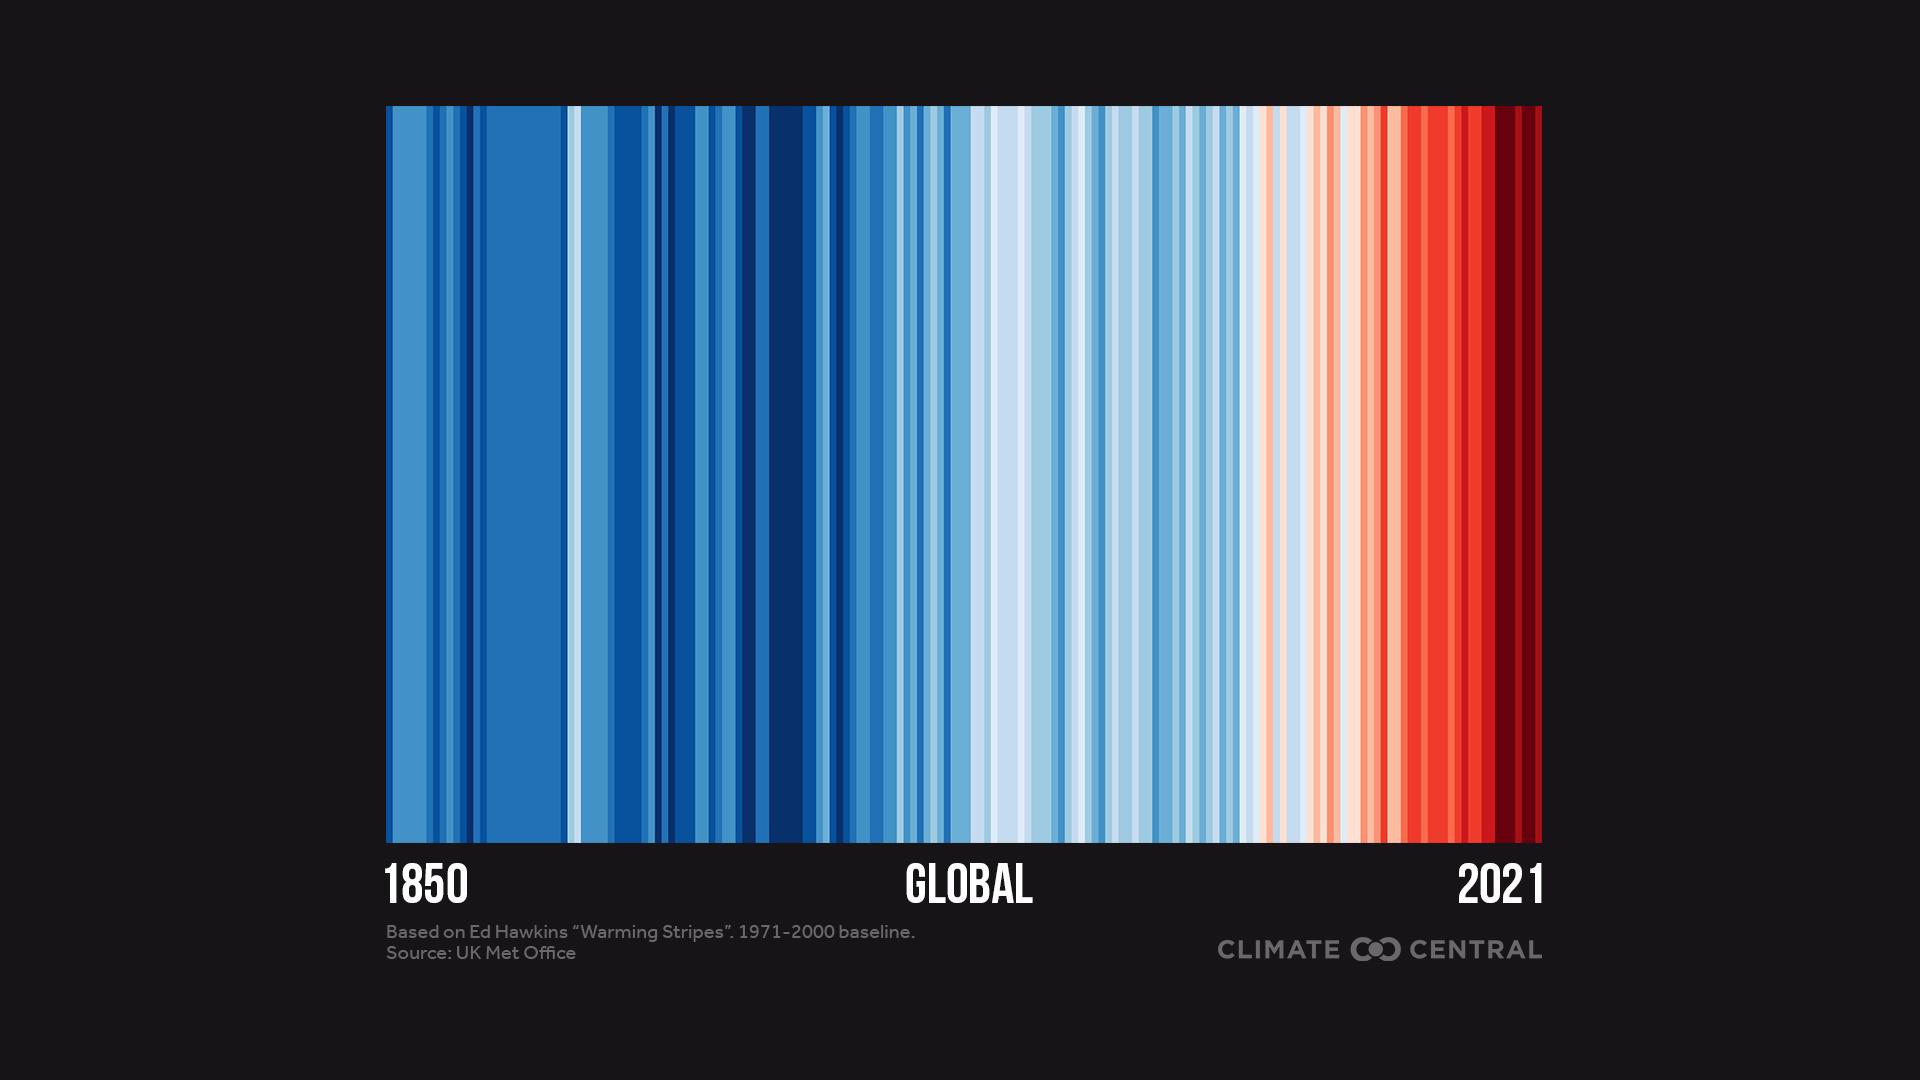 Global Warming Stripes - 2021 in Review: Global Temperature Rankings